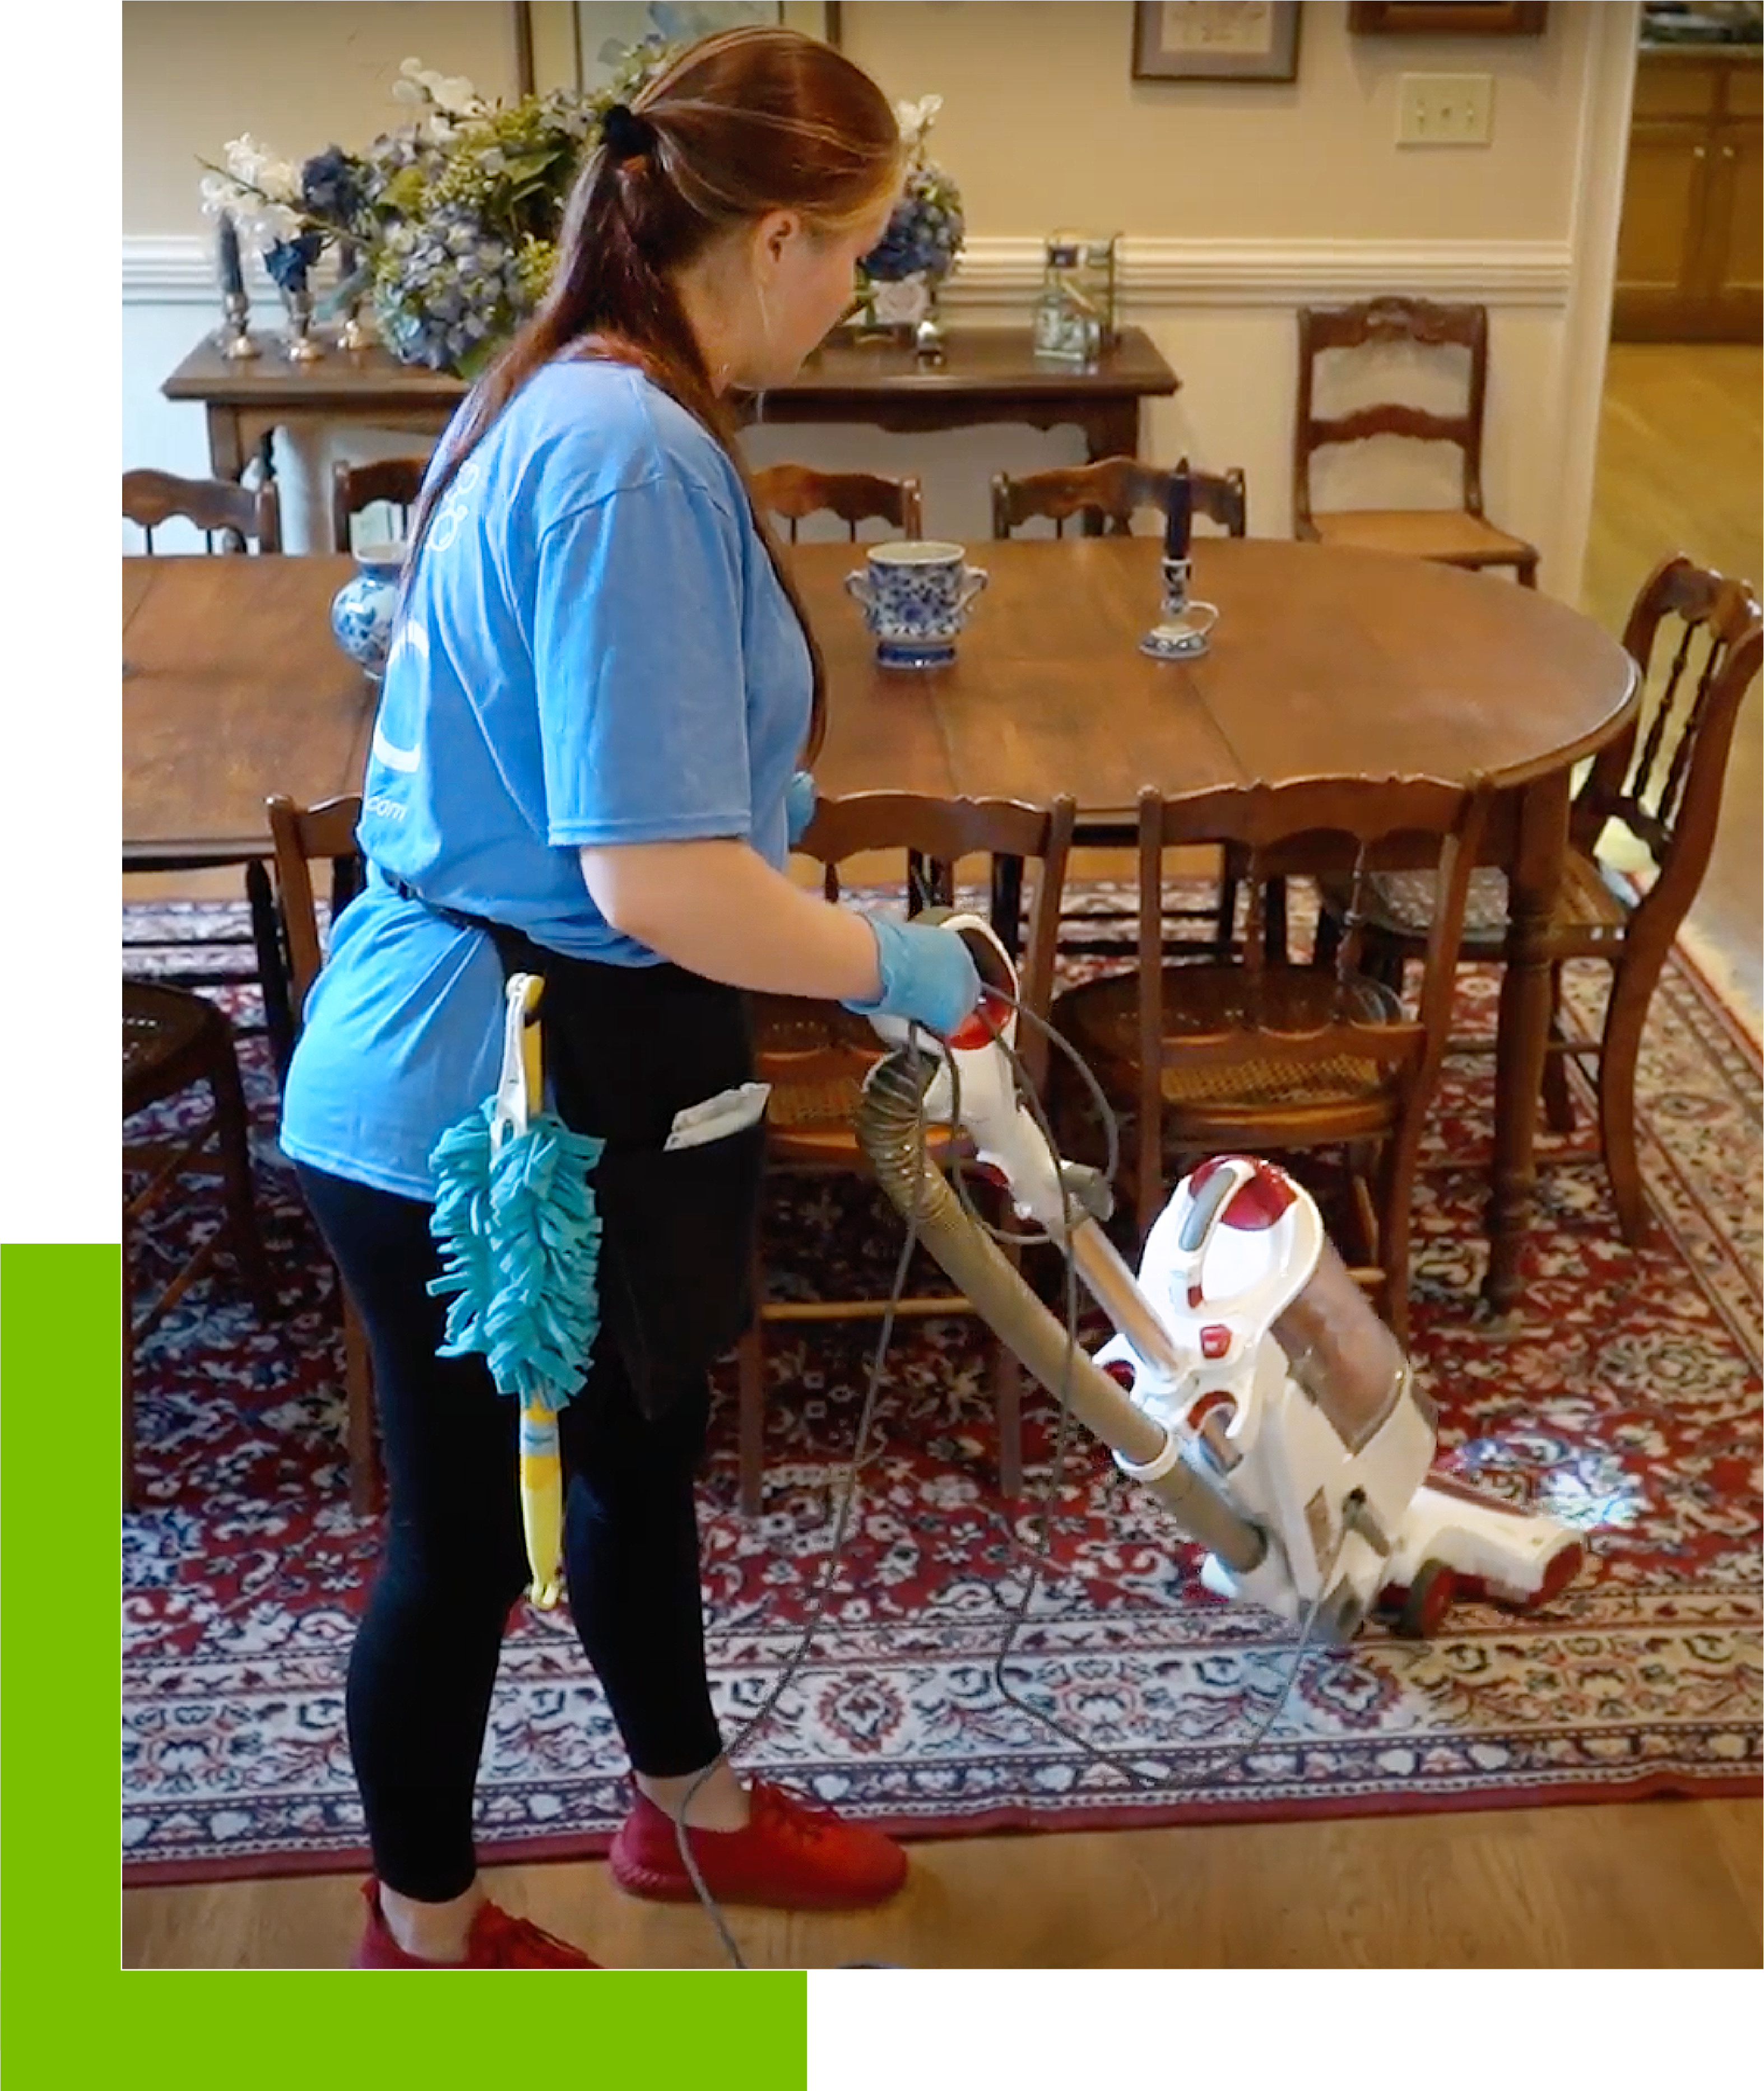 Looking for house cleaning services near me in Social Circle, GA?